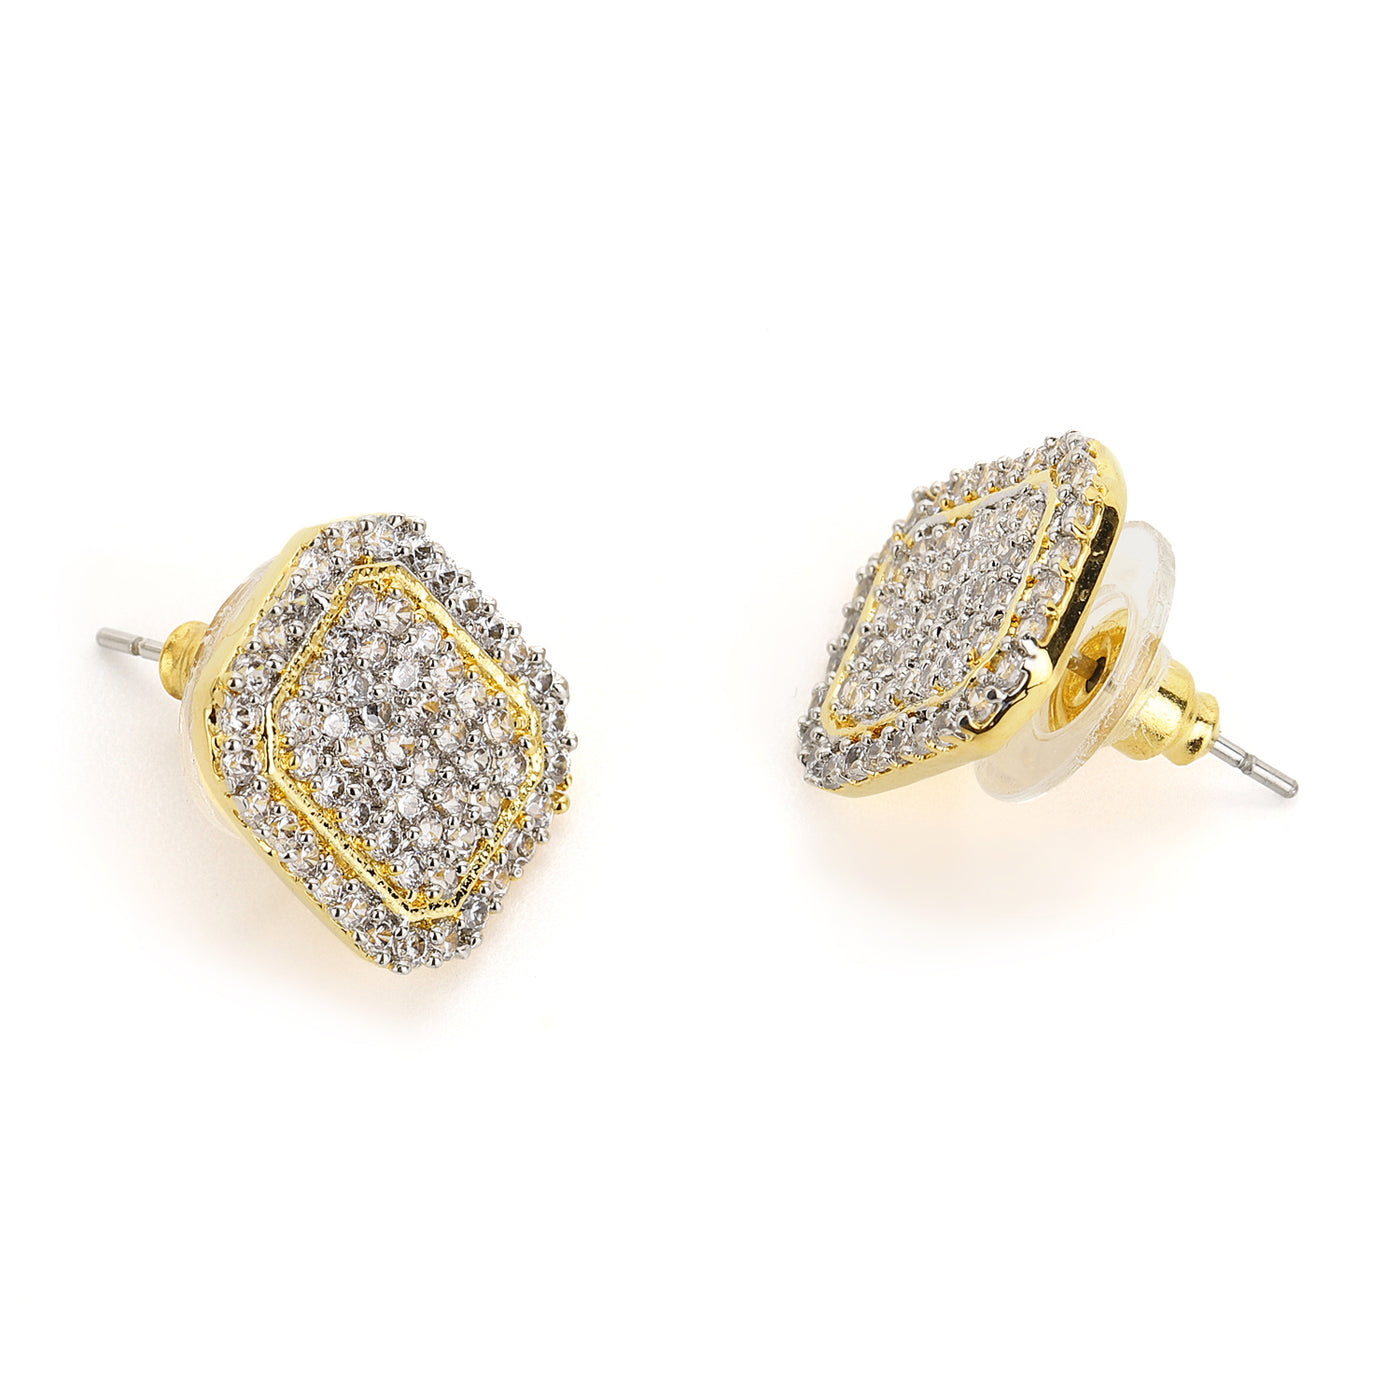 Gold Plated Ad Stone Square Shaped Stud Earrings